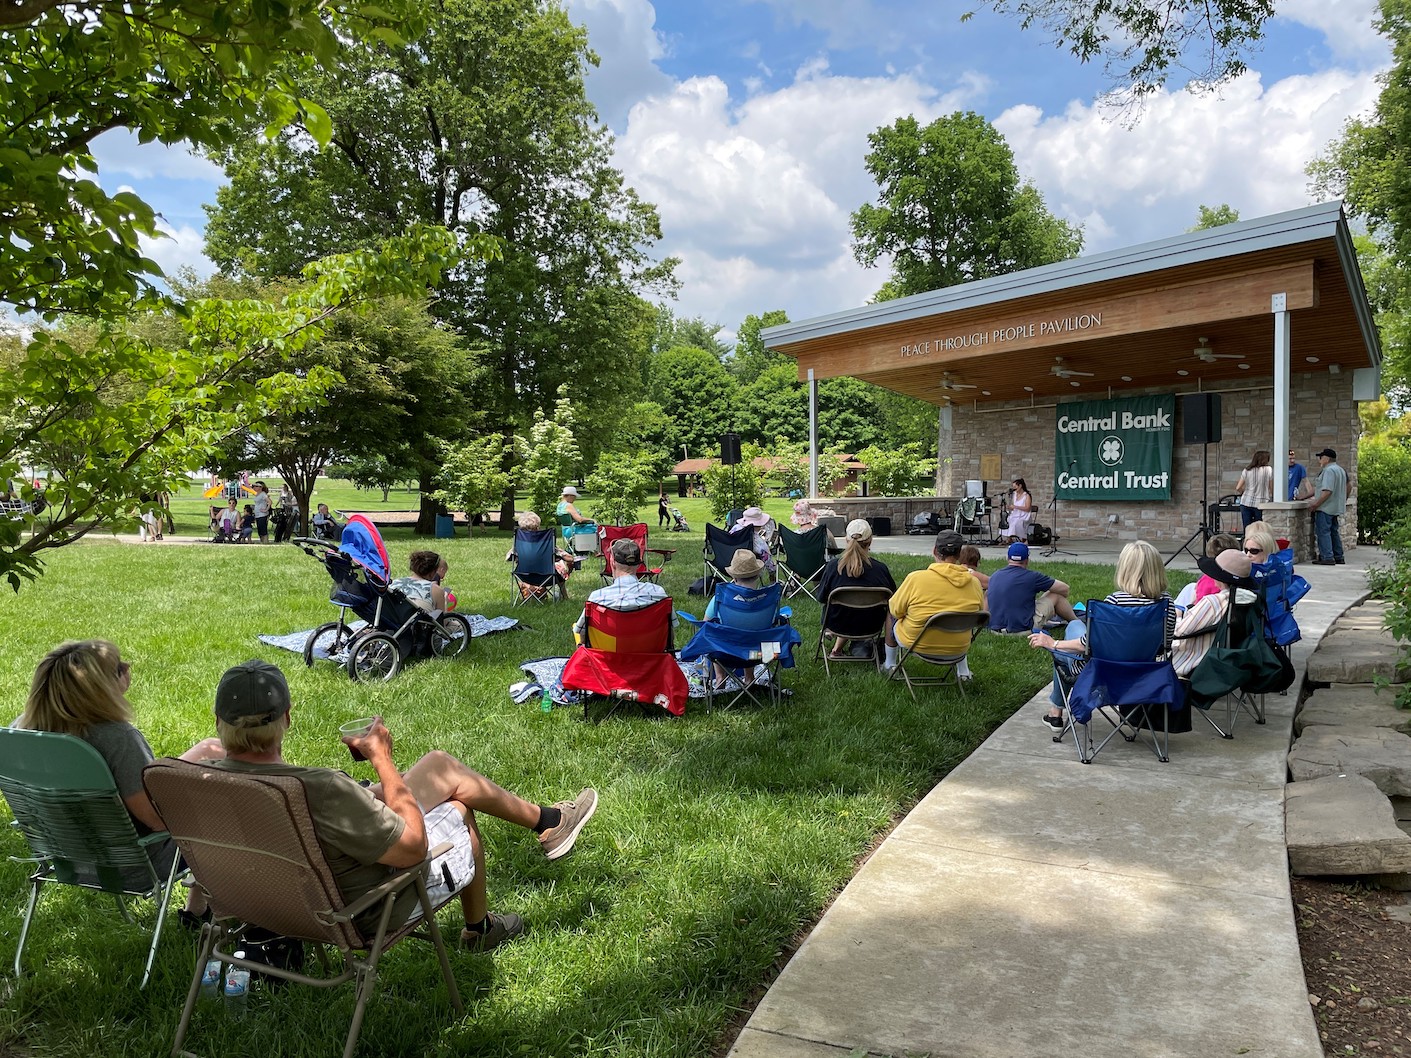 People seated on lawn chairs and blankets enjoy a concert in a park